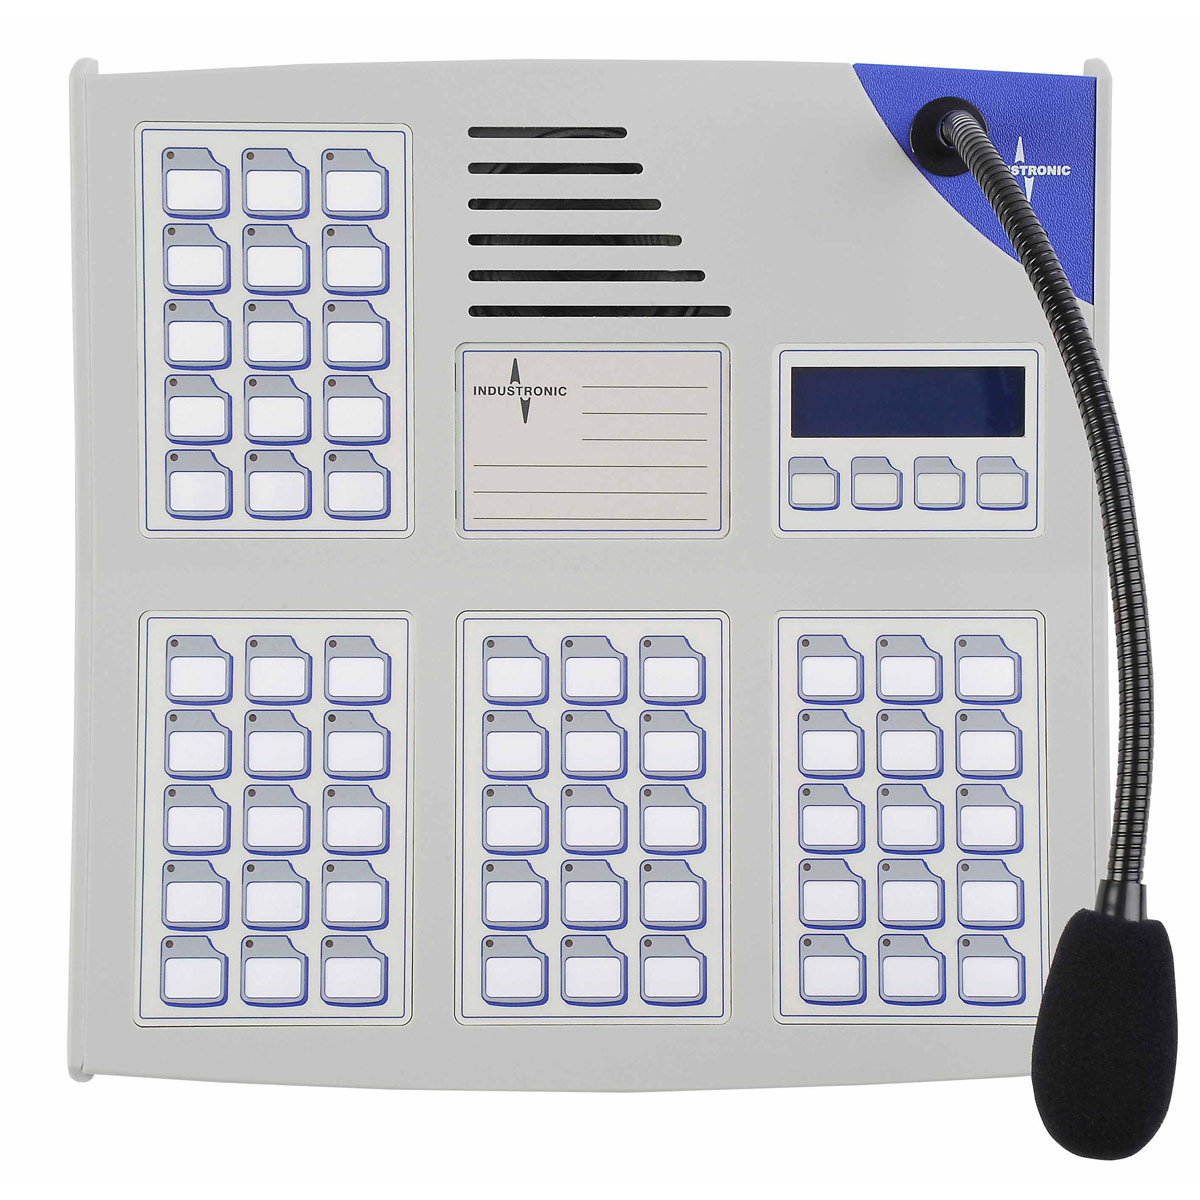 Digital Intercom Stationwith gooseneck microphone,  up to 60 keys, interface for handset connection,  LCD display and 4 function keys